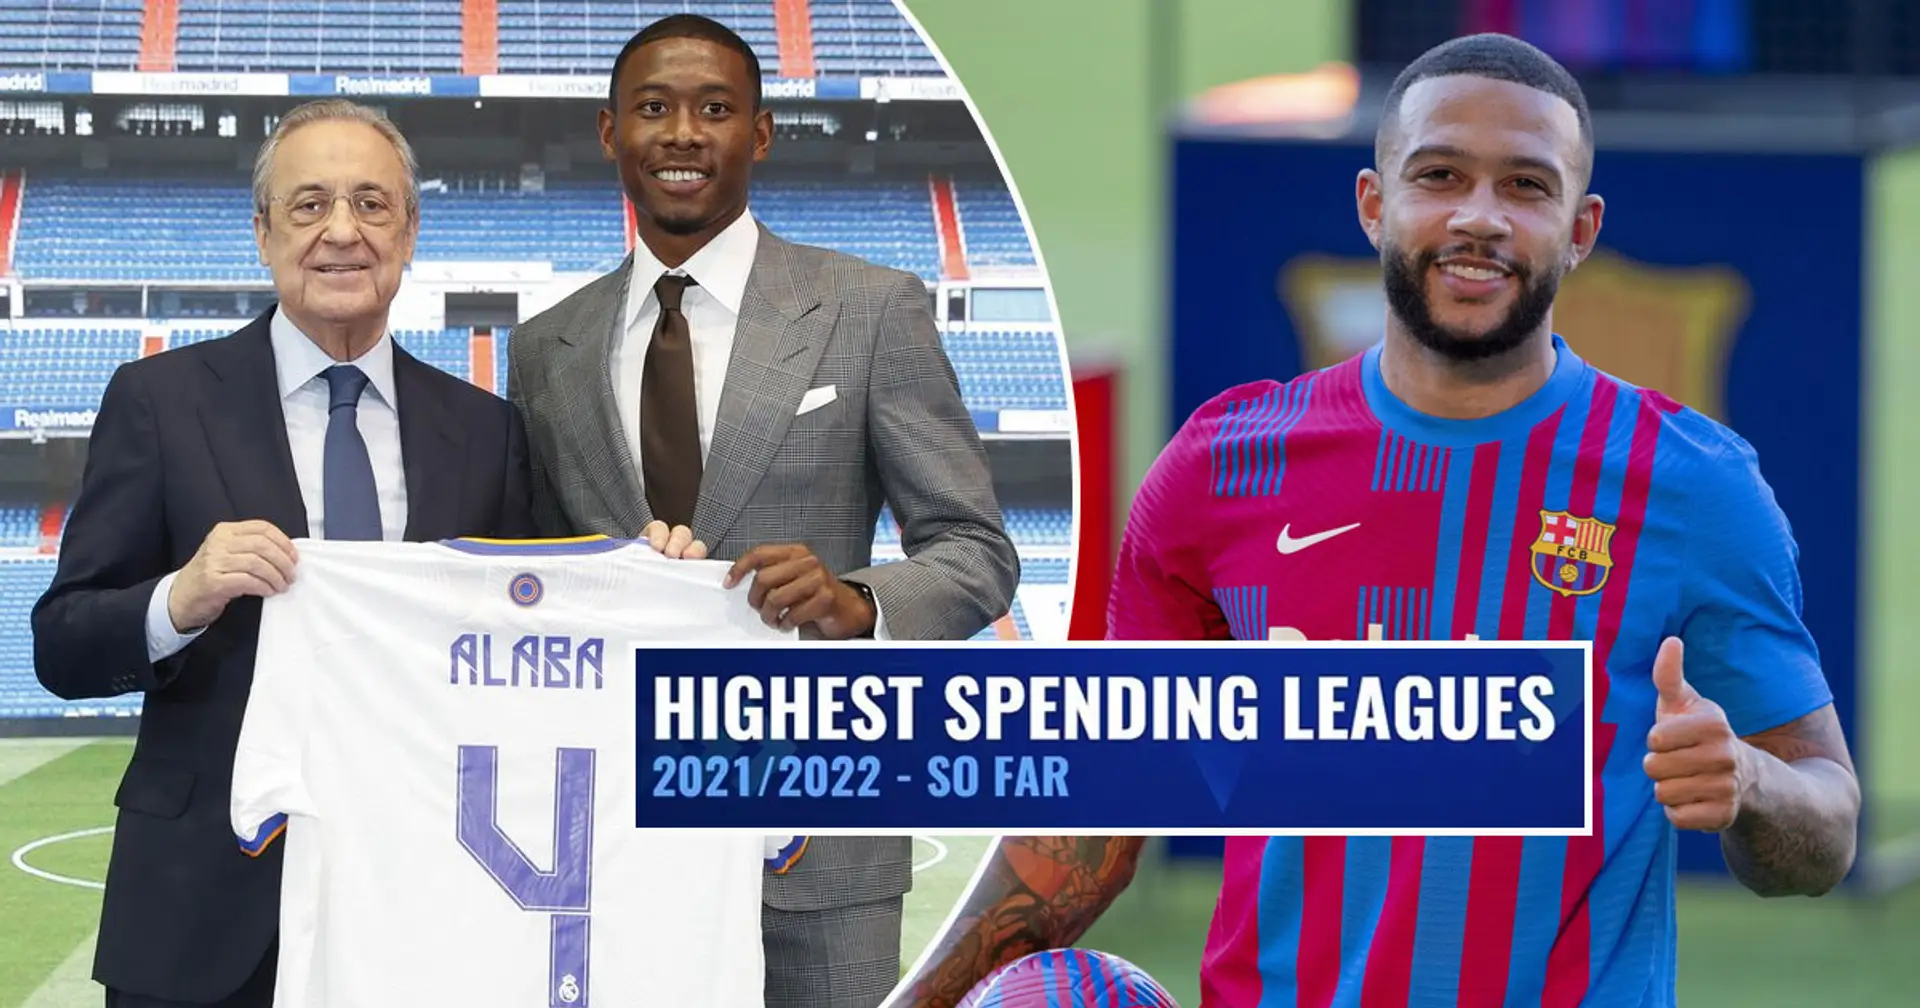 Revealed: Where La Liga stands among world's highest spending leagues this summer